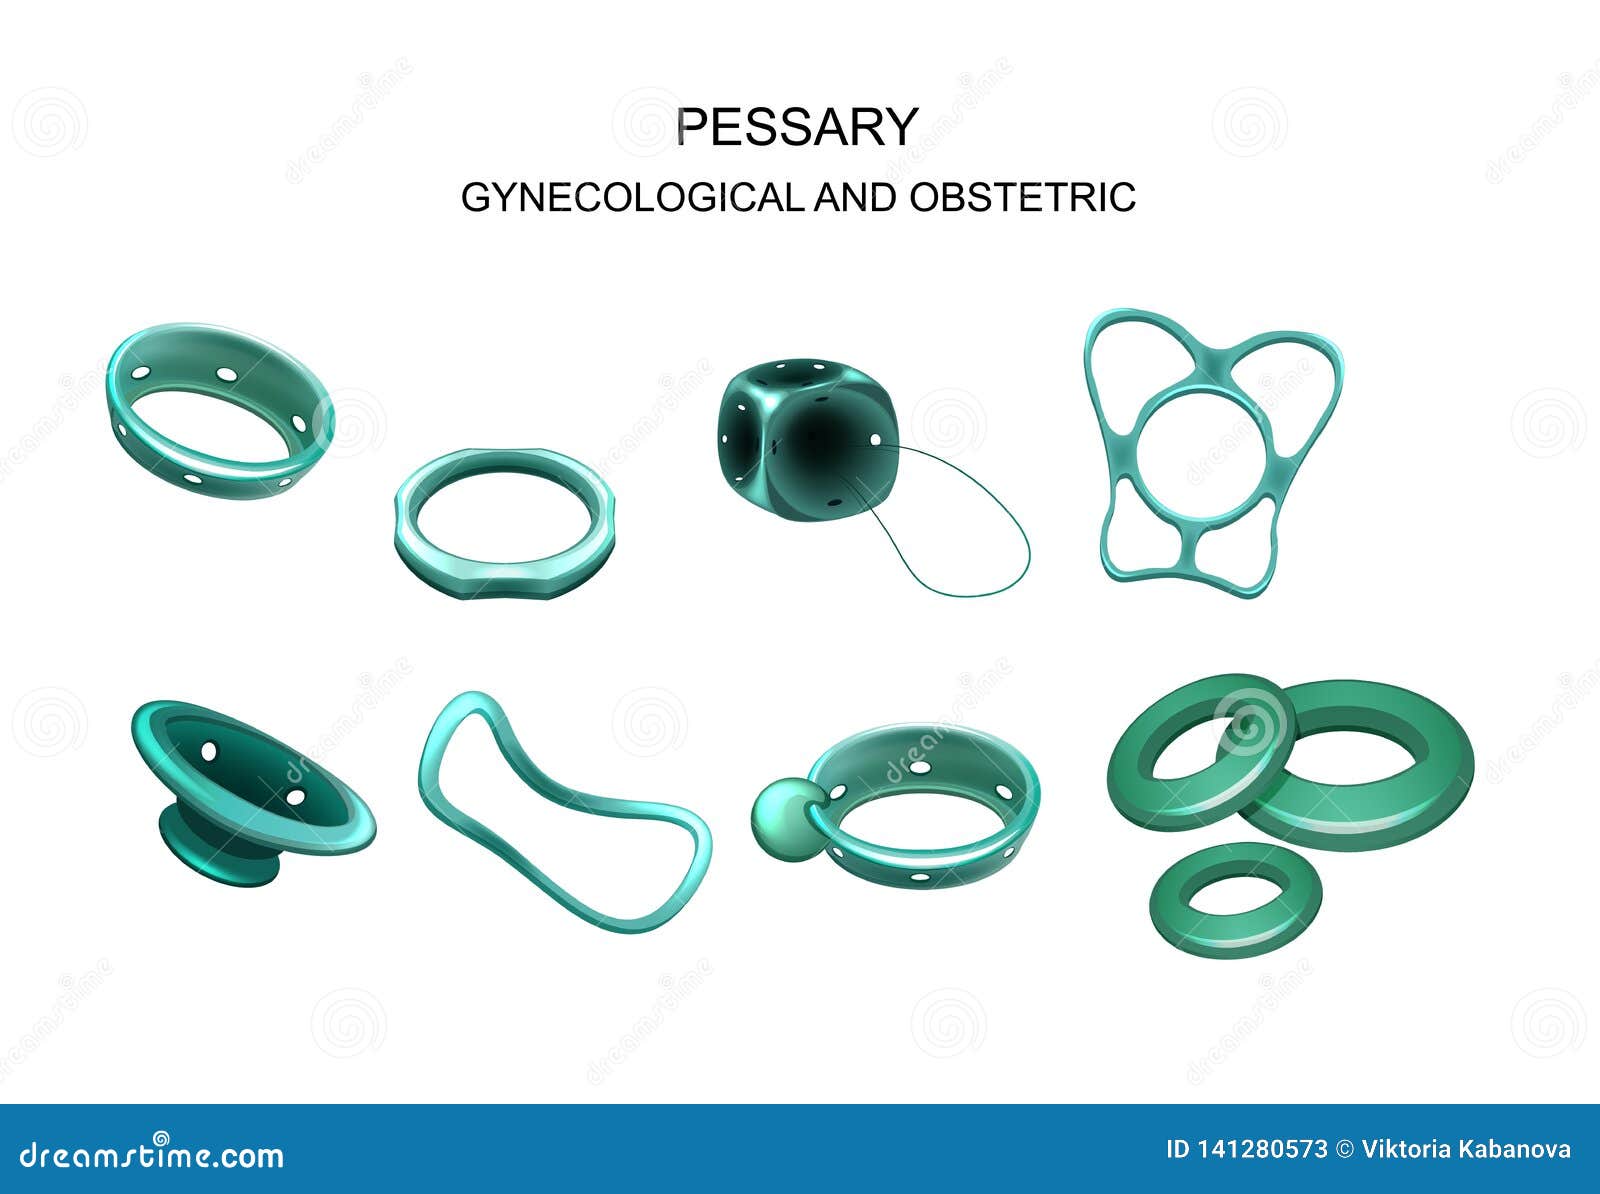 gynecological and obstetric pessary